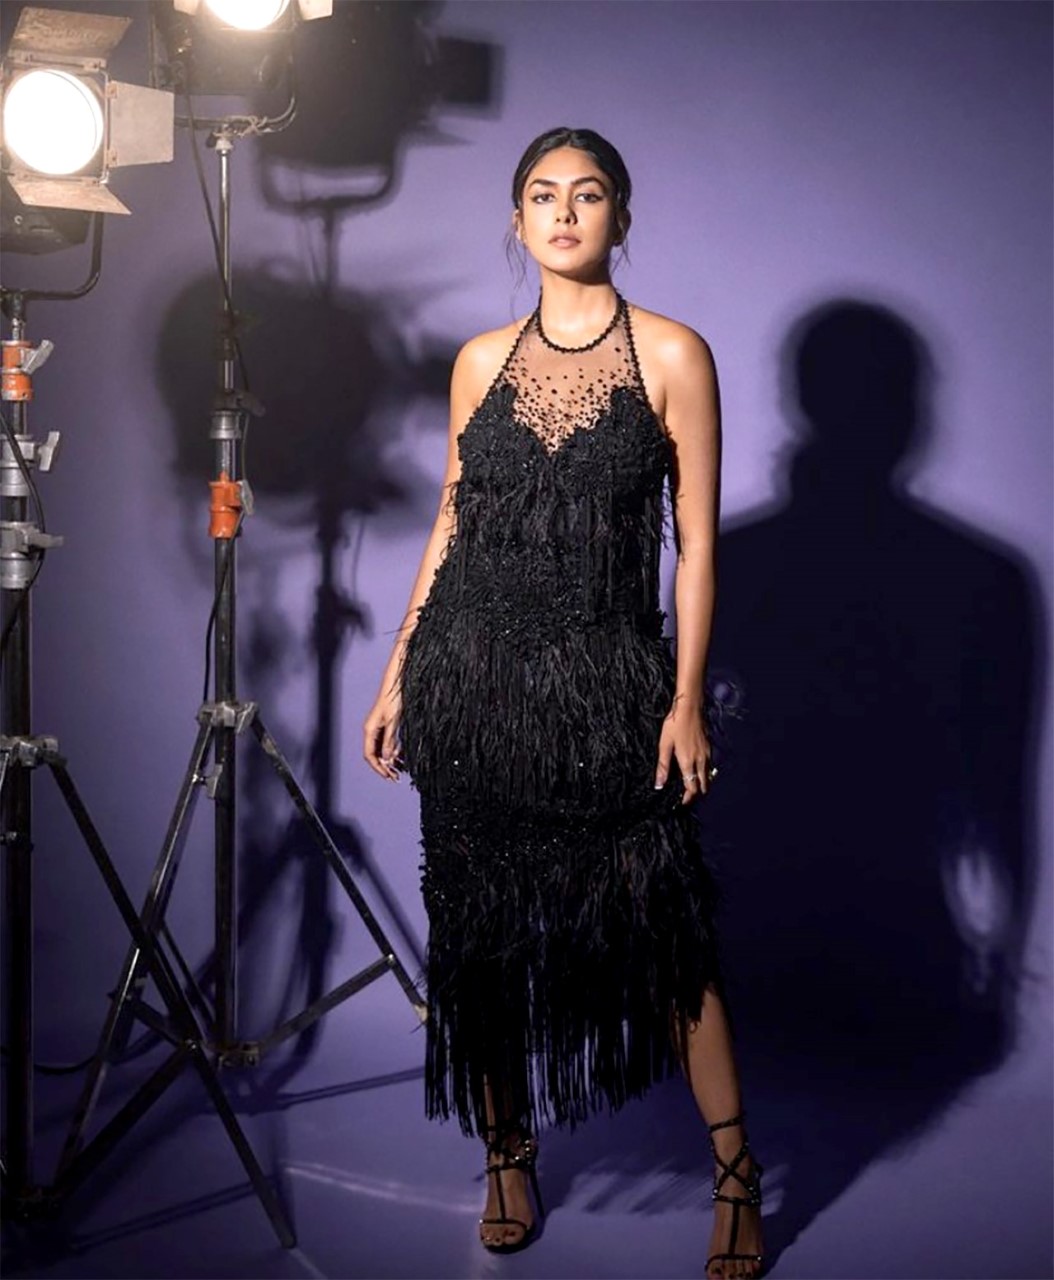 Mrunal Thakur amps up the glamour quotient in a stunning black beaded fringe dress